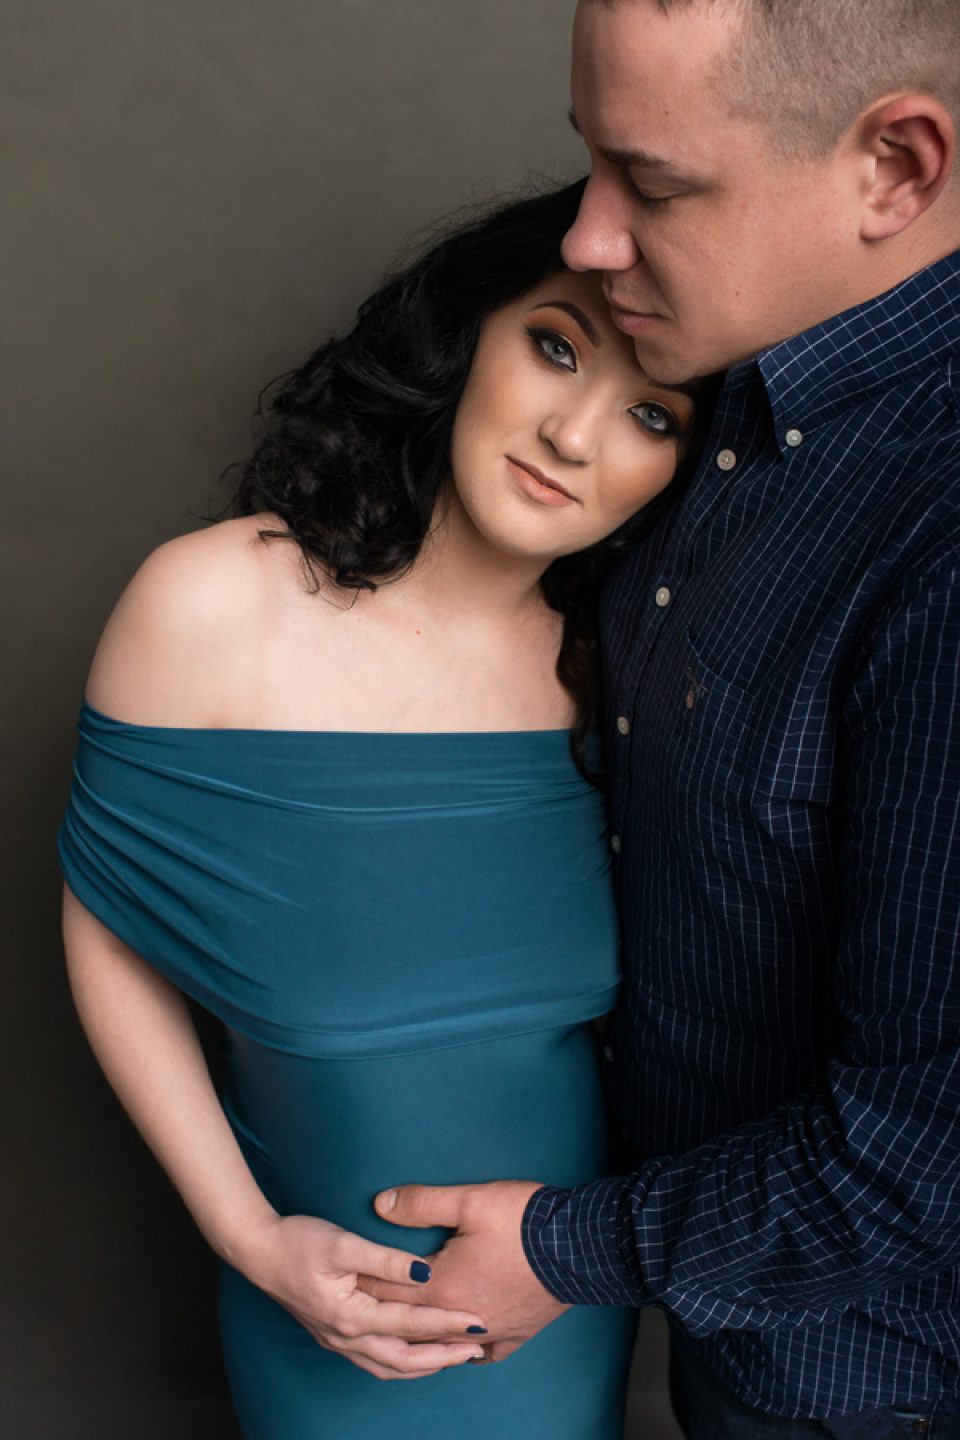 Pregnancy Photography capturing You and Your Family during this Special Moment in Your Life.